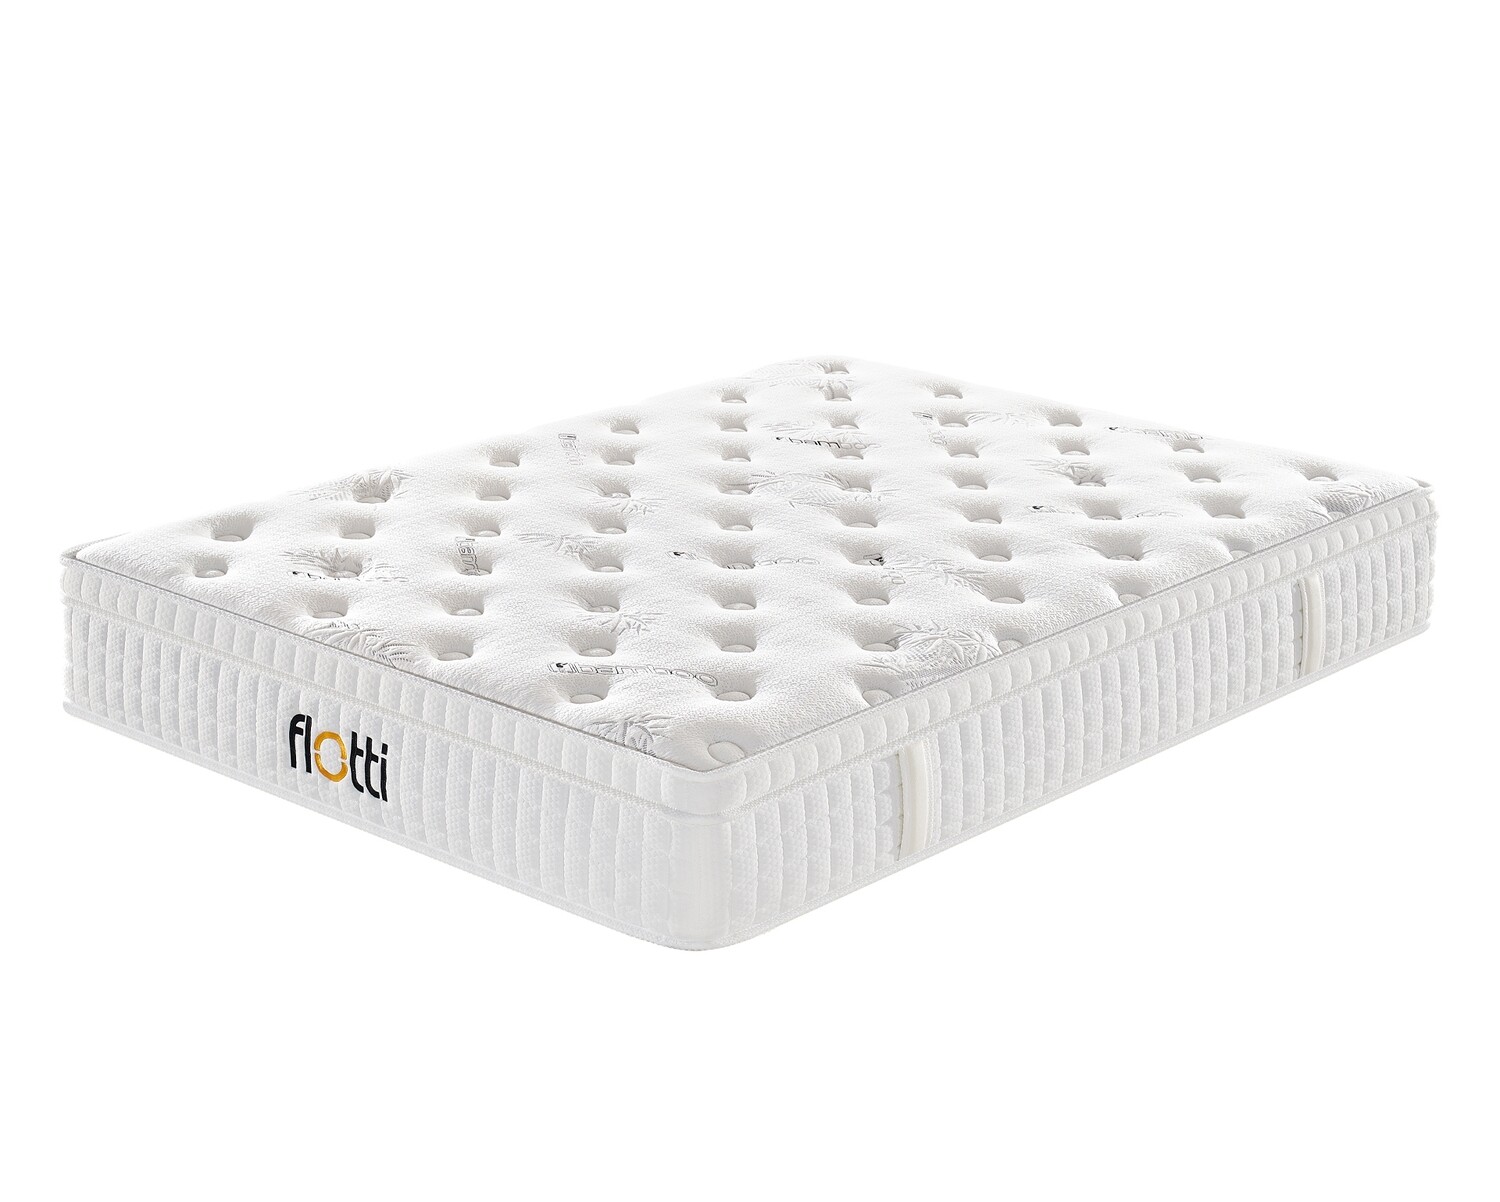 Flotti Bamboo Wave Hybrid Mattress with Cool Gel Infused Memory Foam (Single, Double, Queen & King)